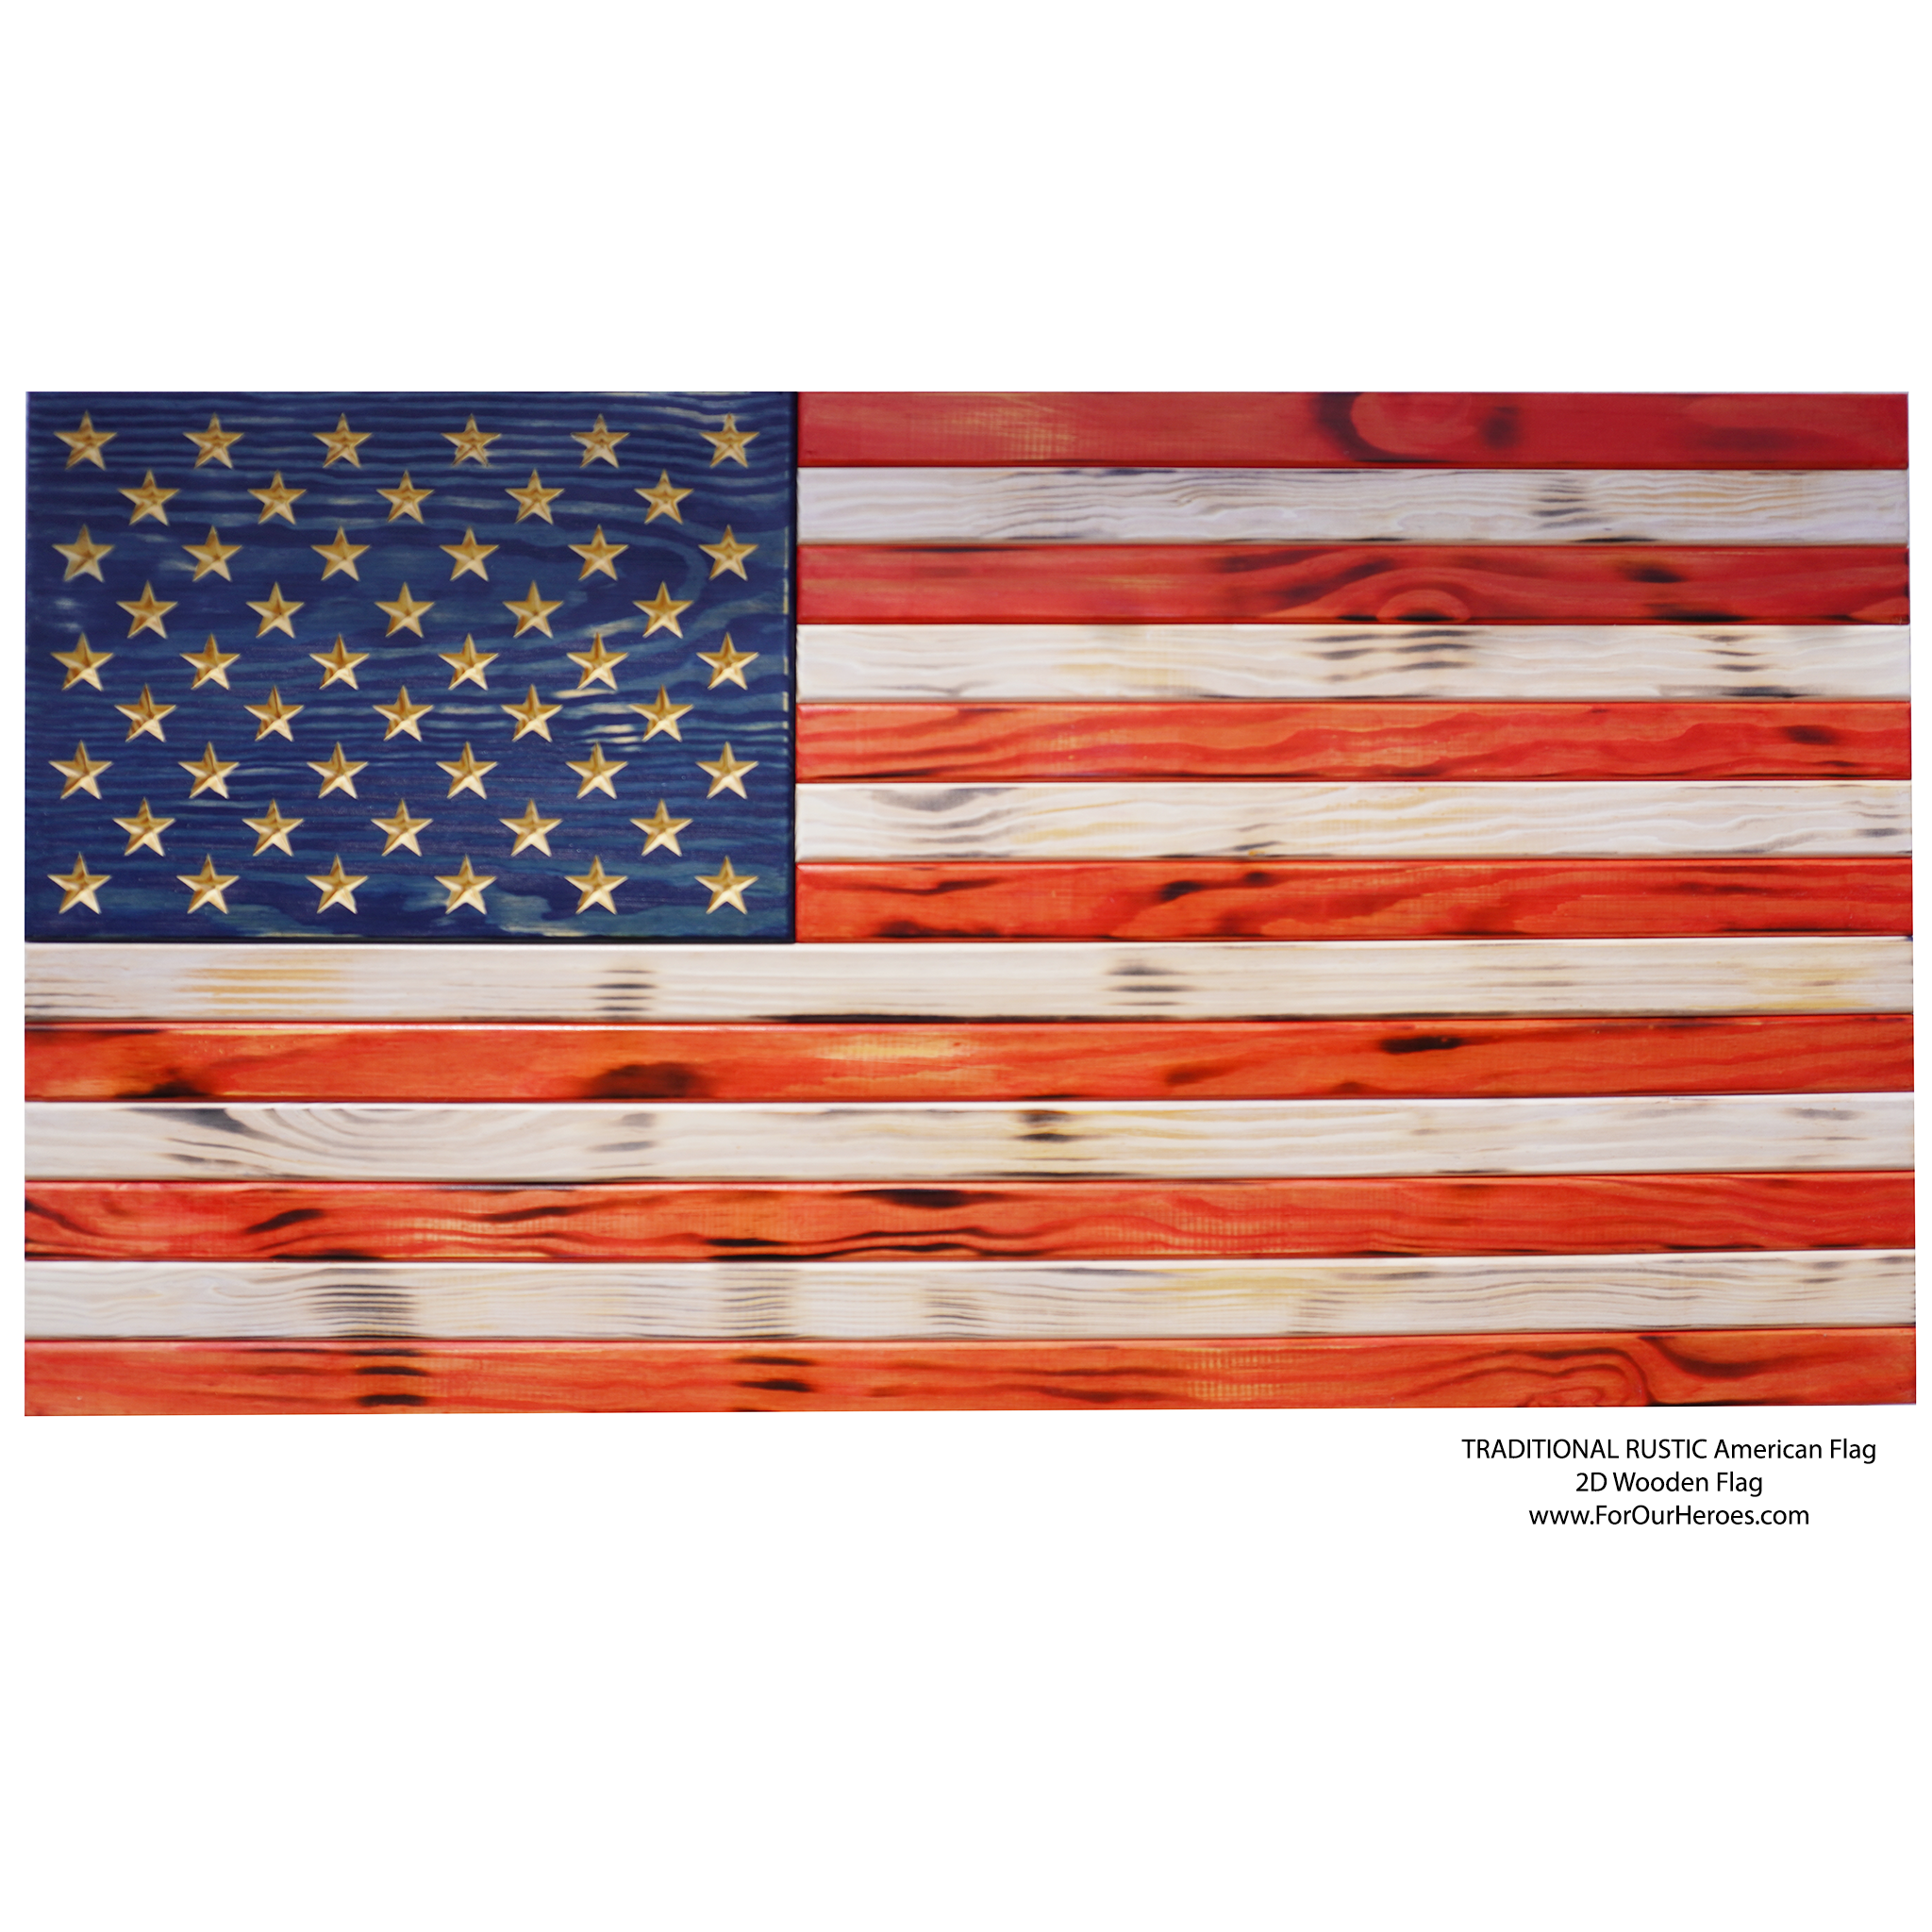 2D TRADITIONAL RUSTIC American Flag - 0